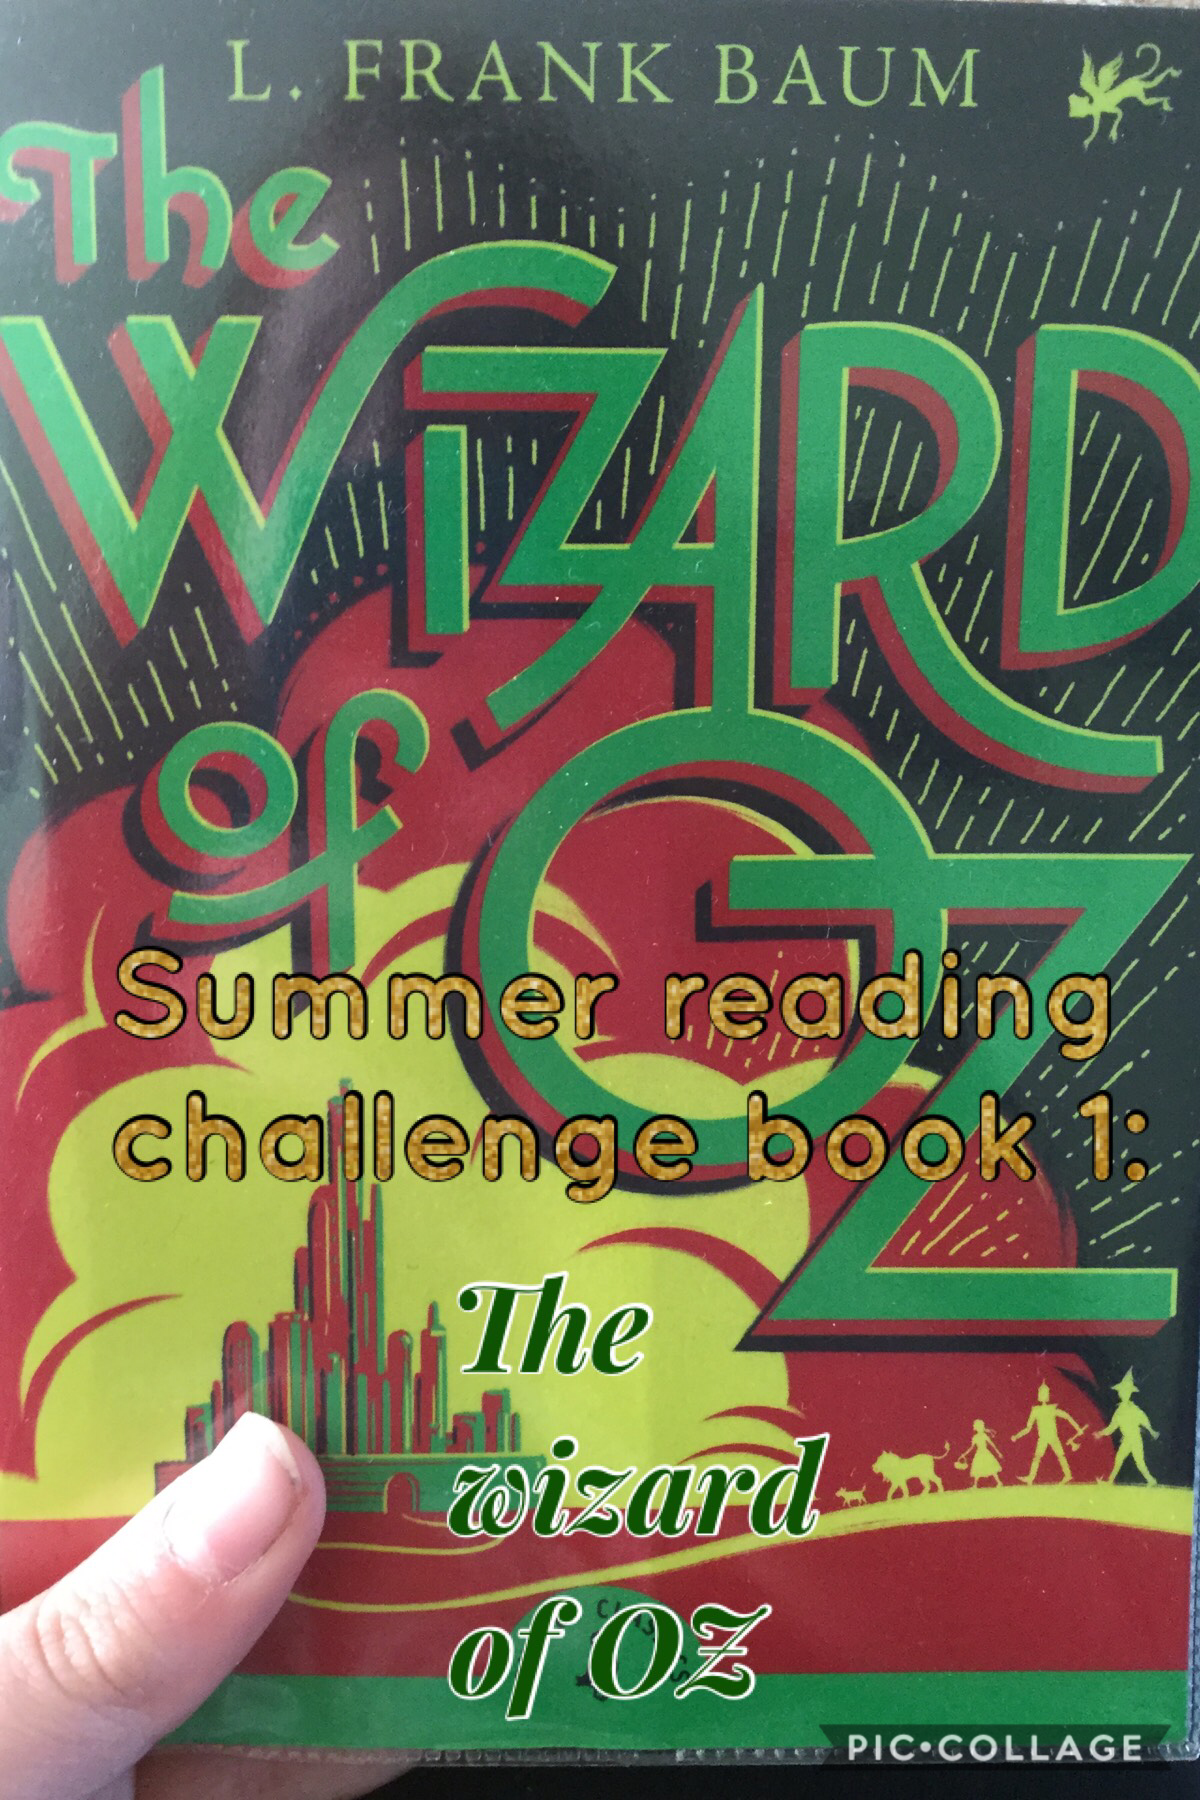 Join in my reading challenge and try and read 6 books of your choice over the summer